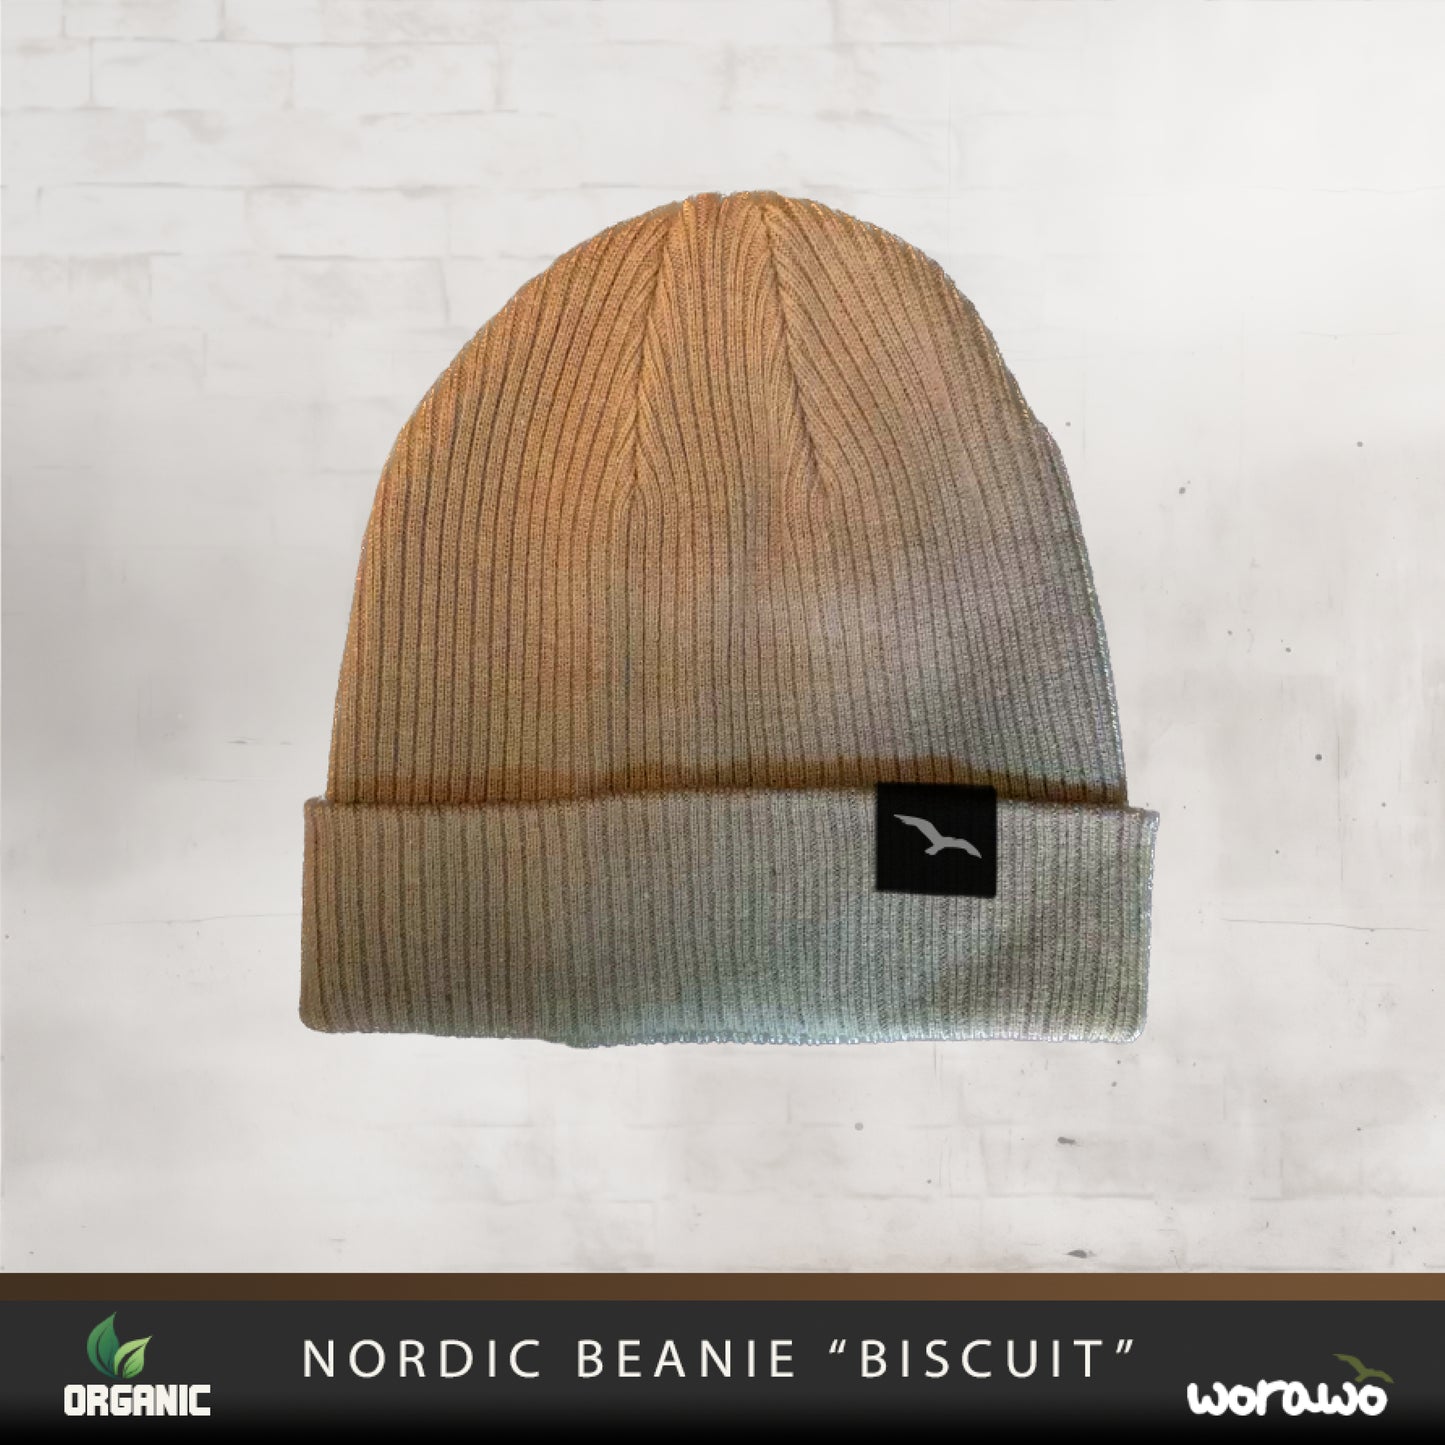 Nordic Beanie "biscuit"